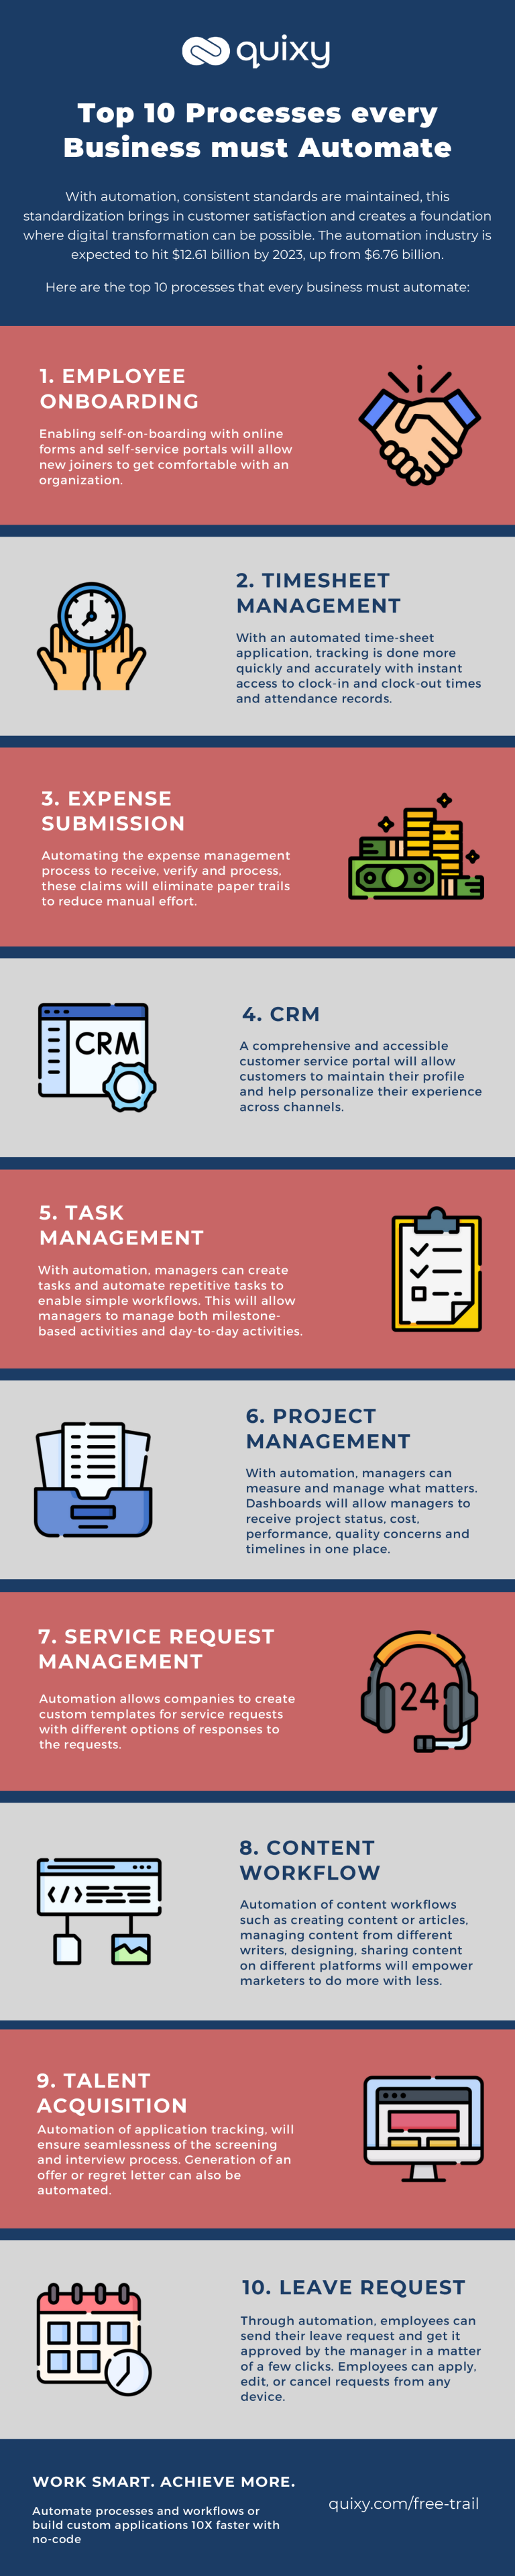 Infographic Top 10 Processes Every Business Must Automate Quixy 0745